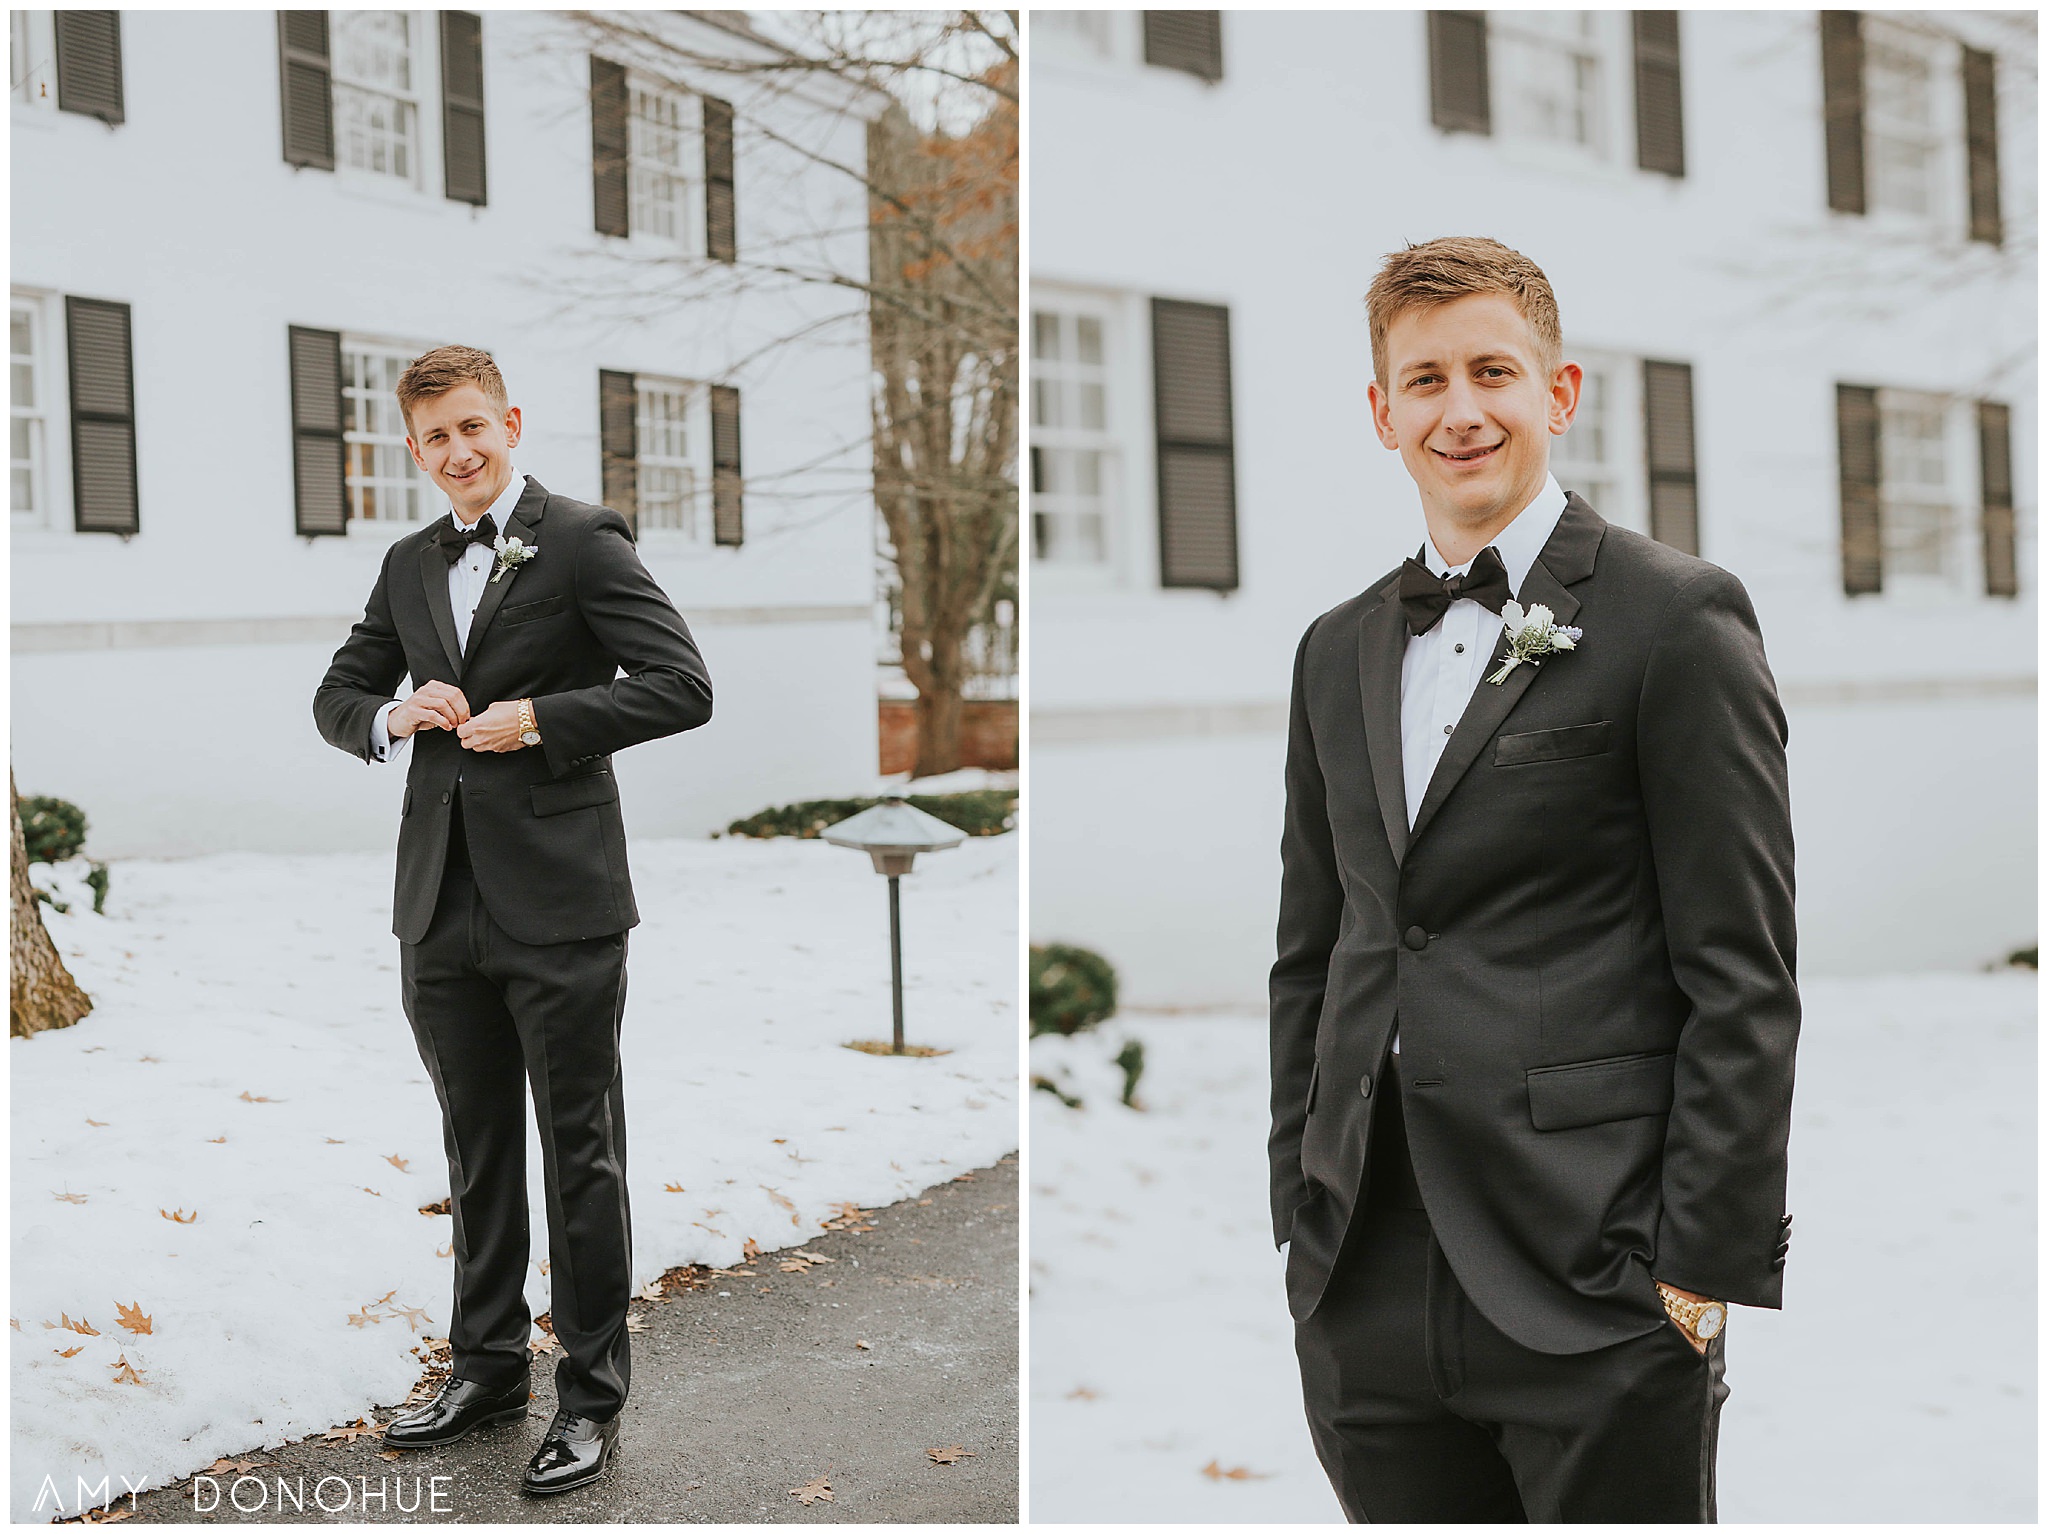 Groom portraits at the Woodstock Inn and Resort